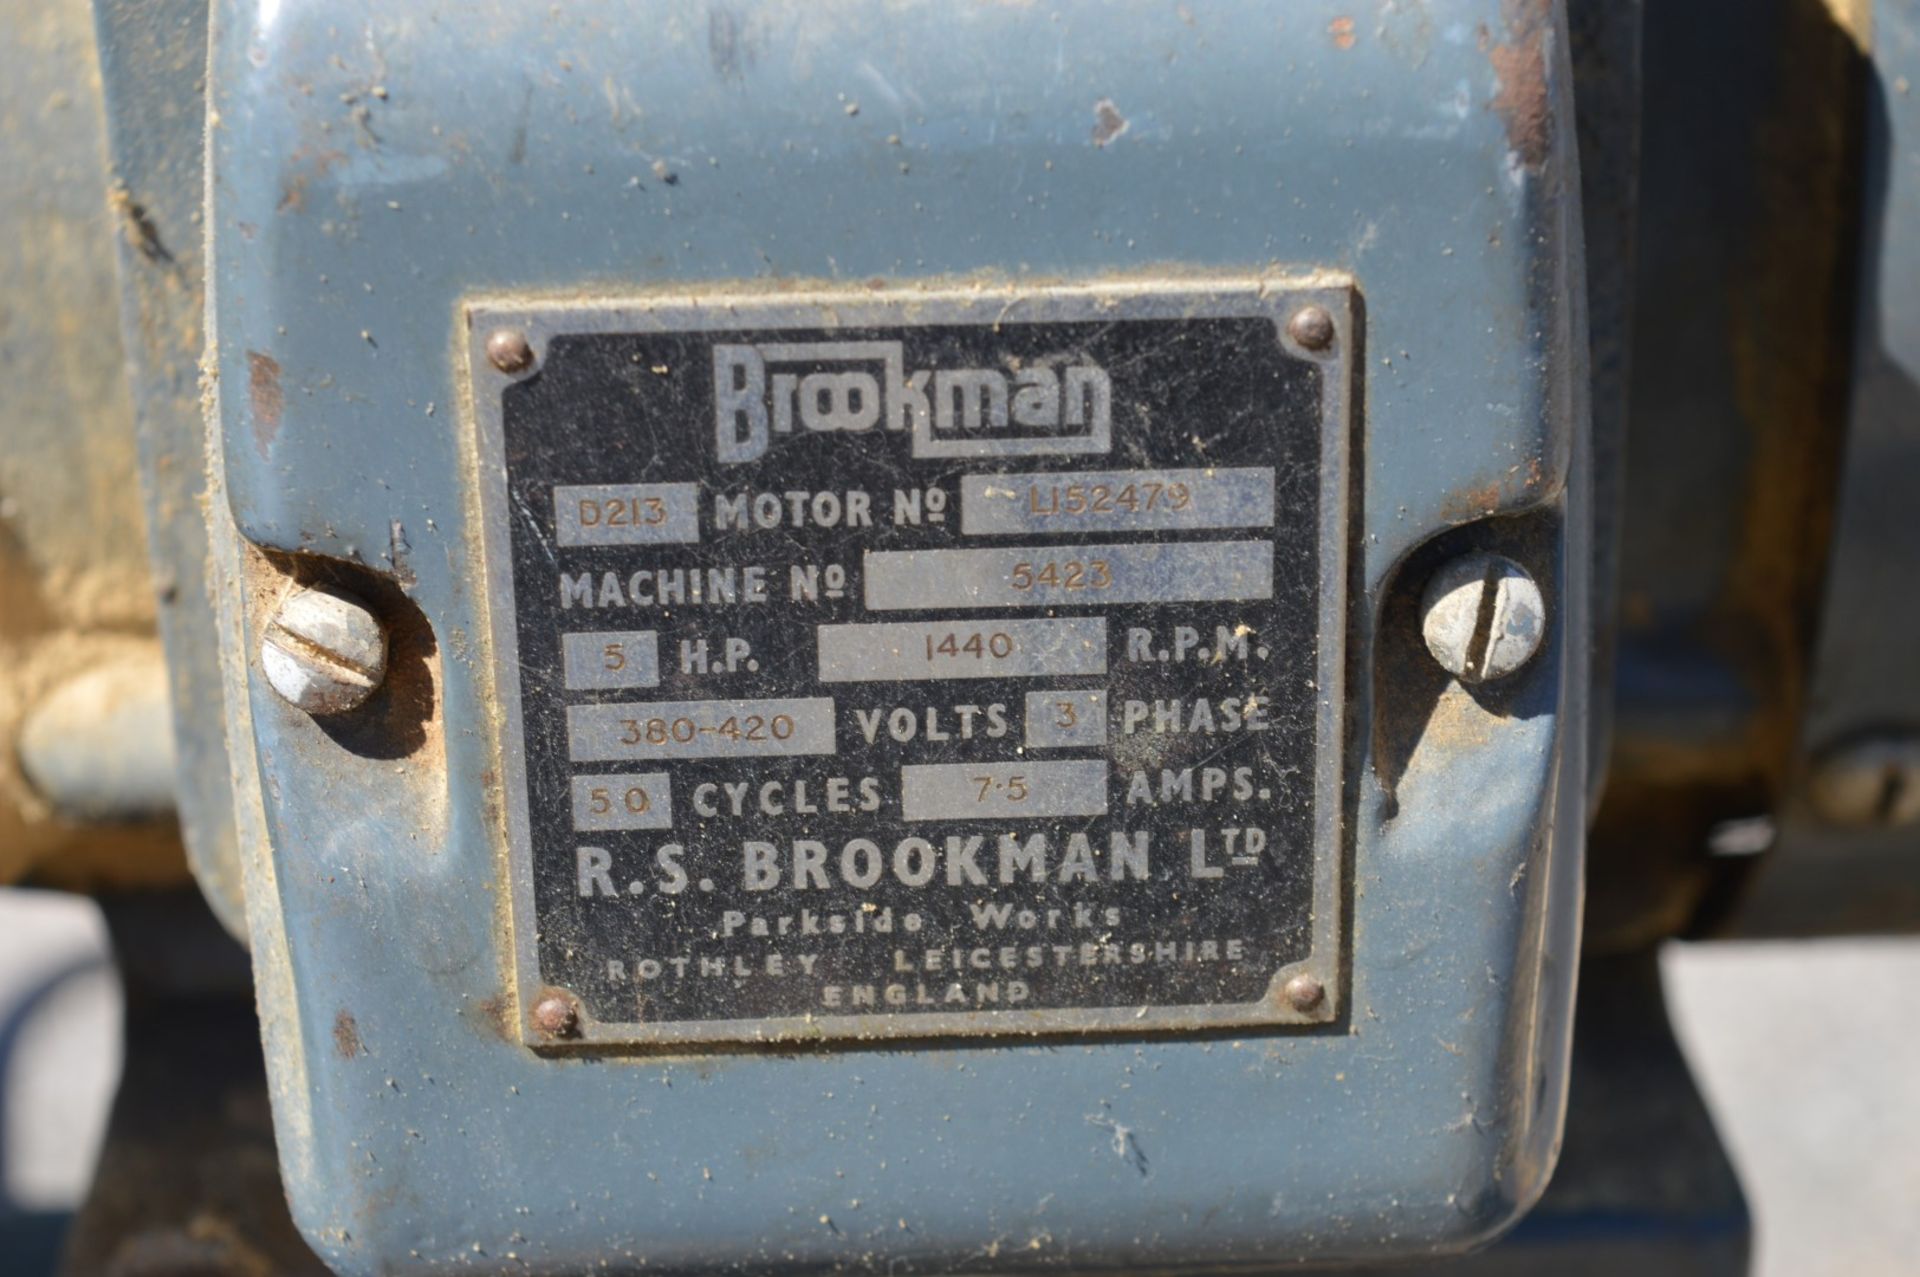 1 x Brookman Dovetailing Machine - Type ADM-1 - Serial No 5423 - 3 Phase - Dimensions H110 x W180 - Image 2 of 12